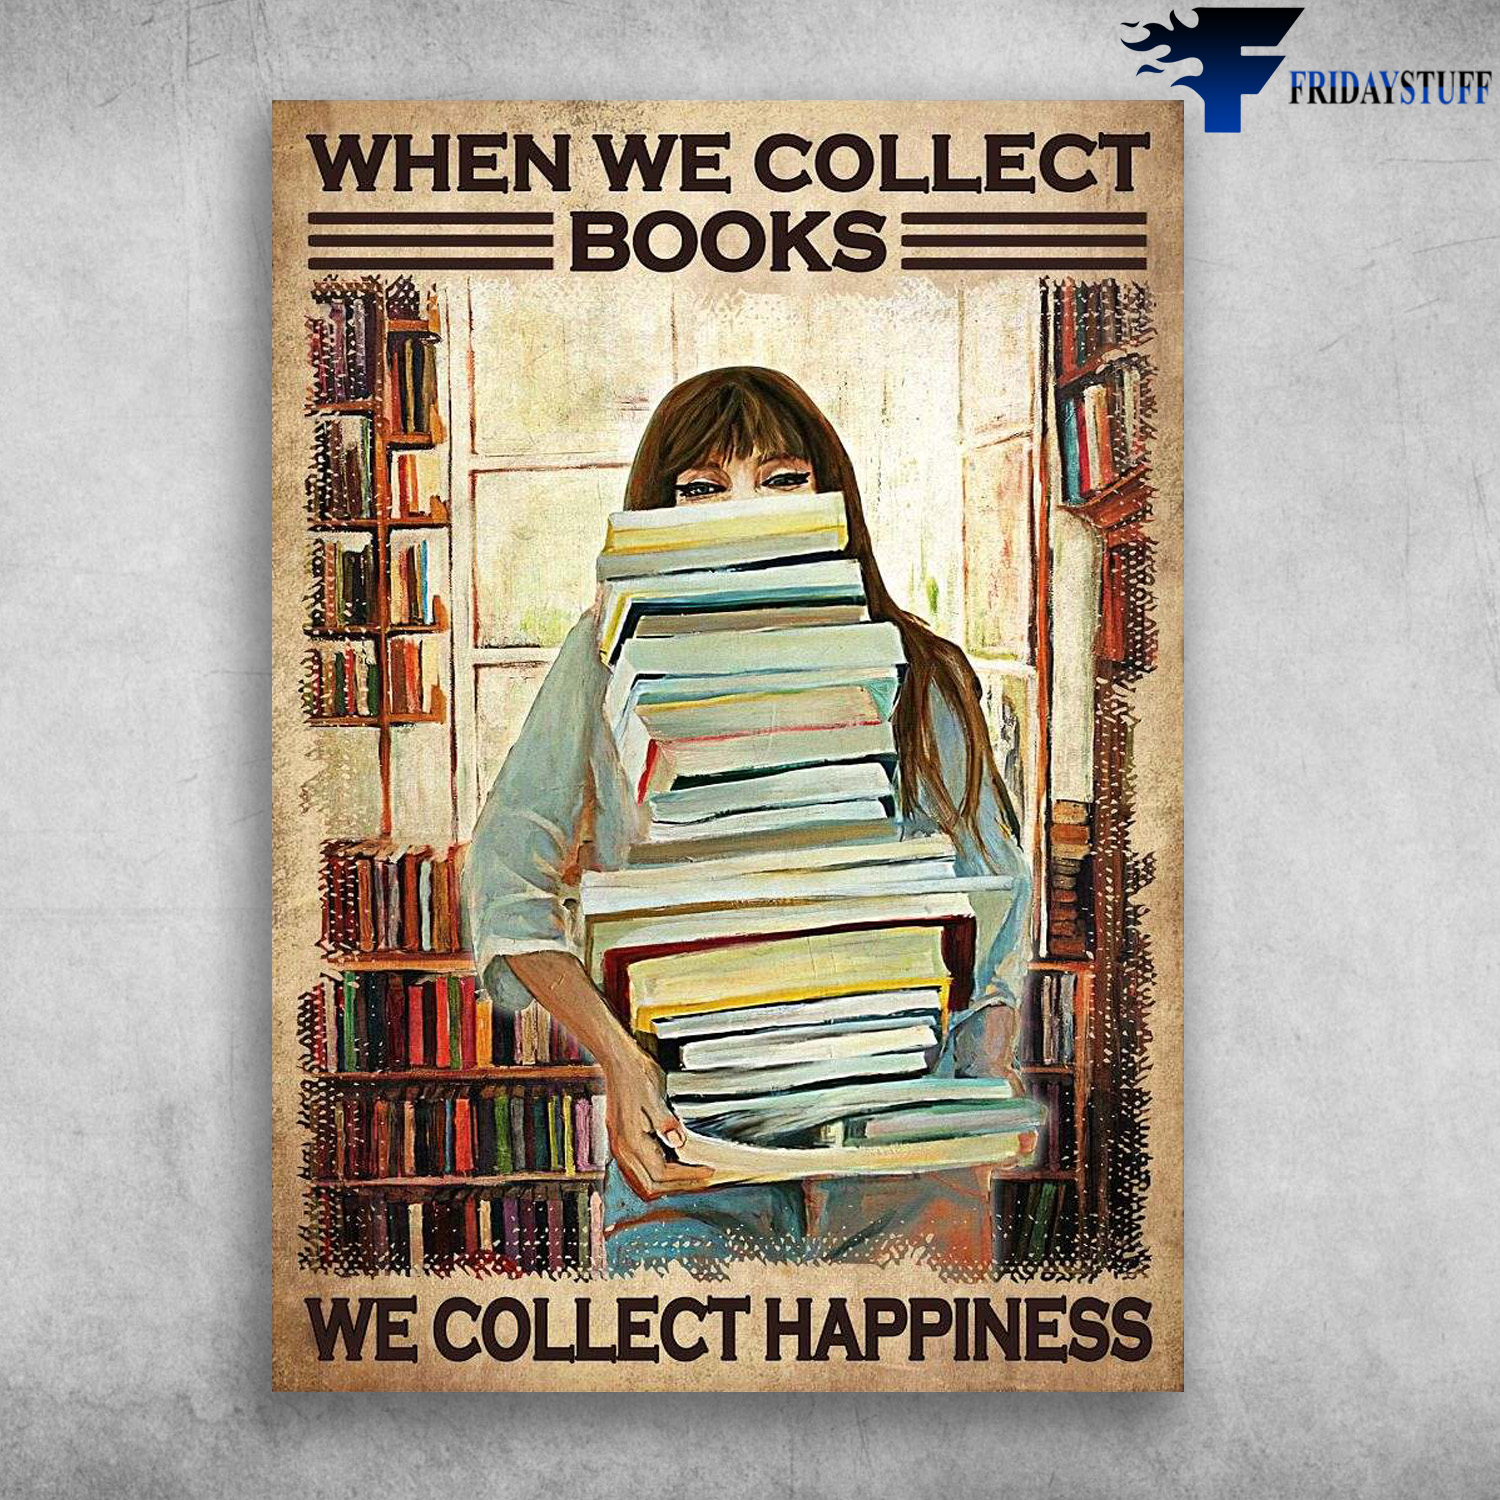 Girl Loves Book, Book Lover, Library Girl - When We Collect Books, We Collect Happiness